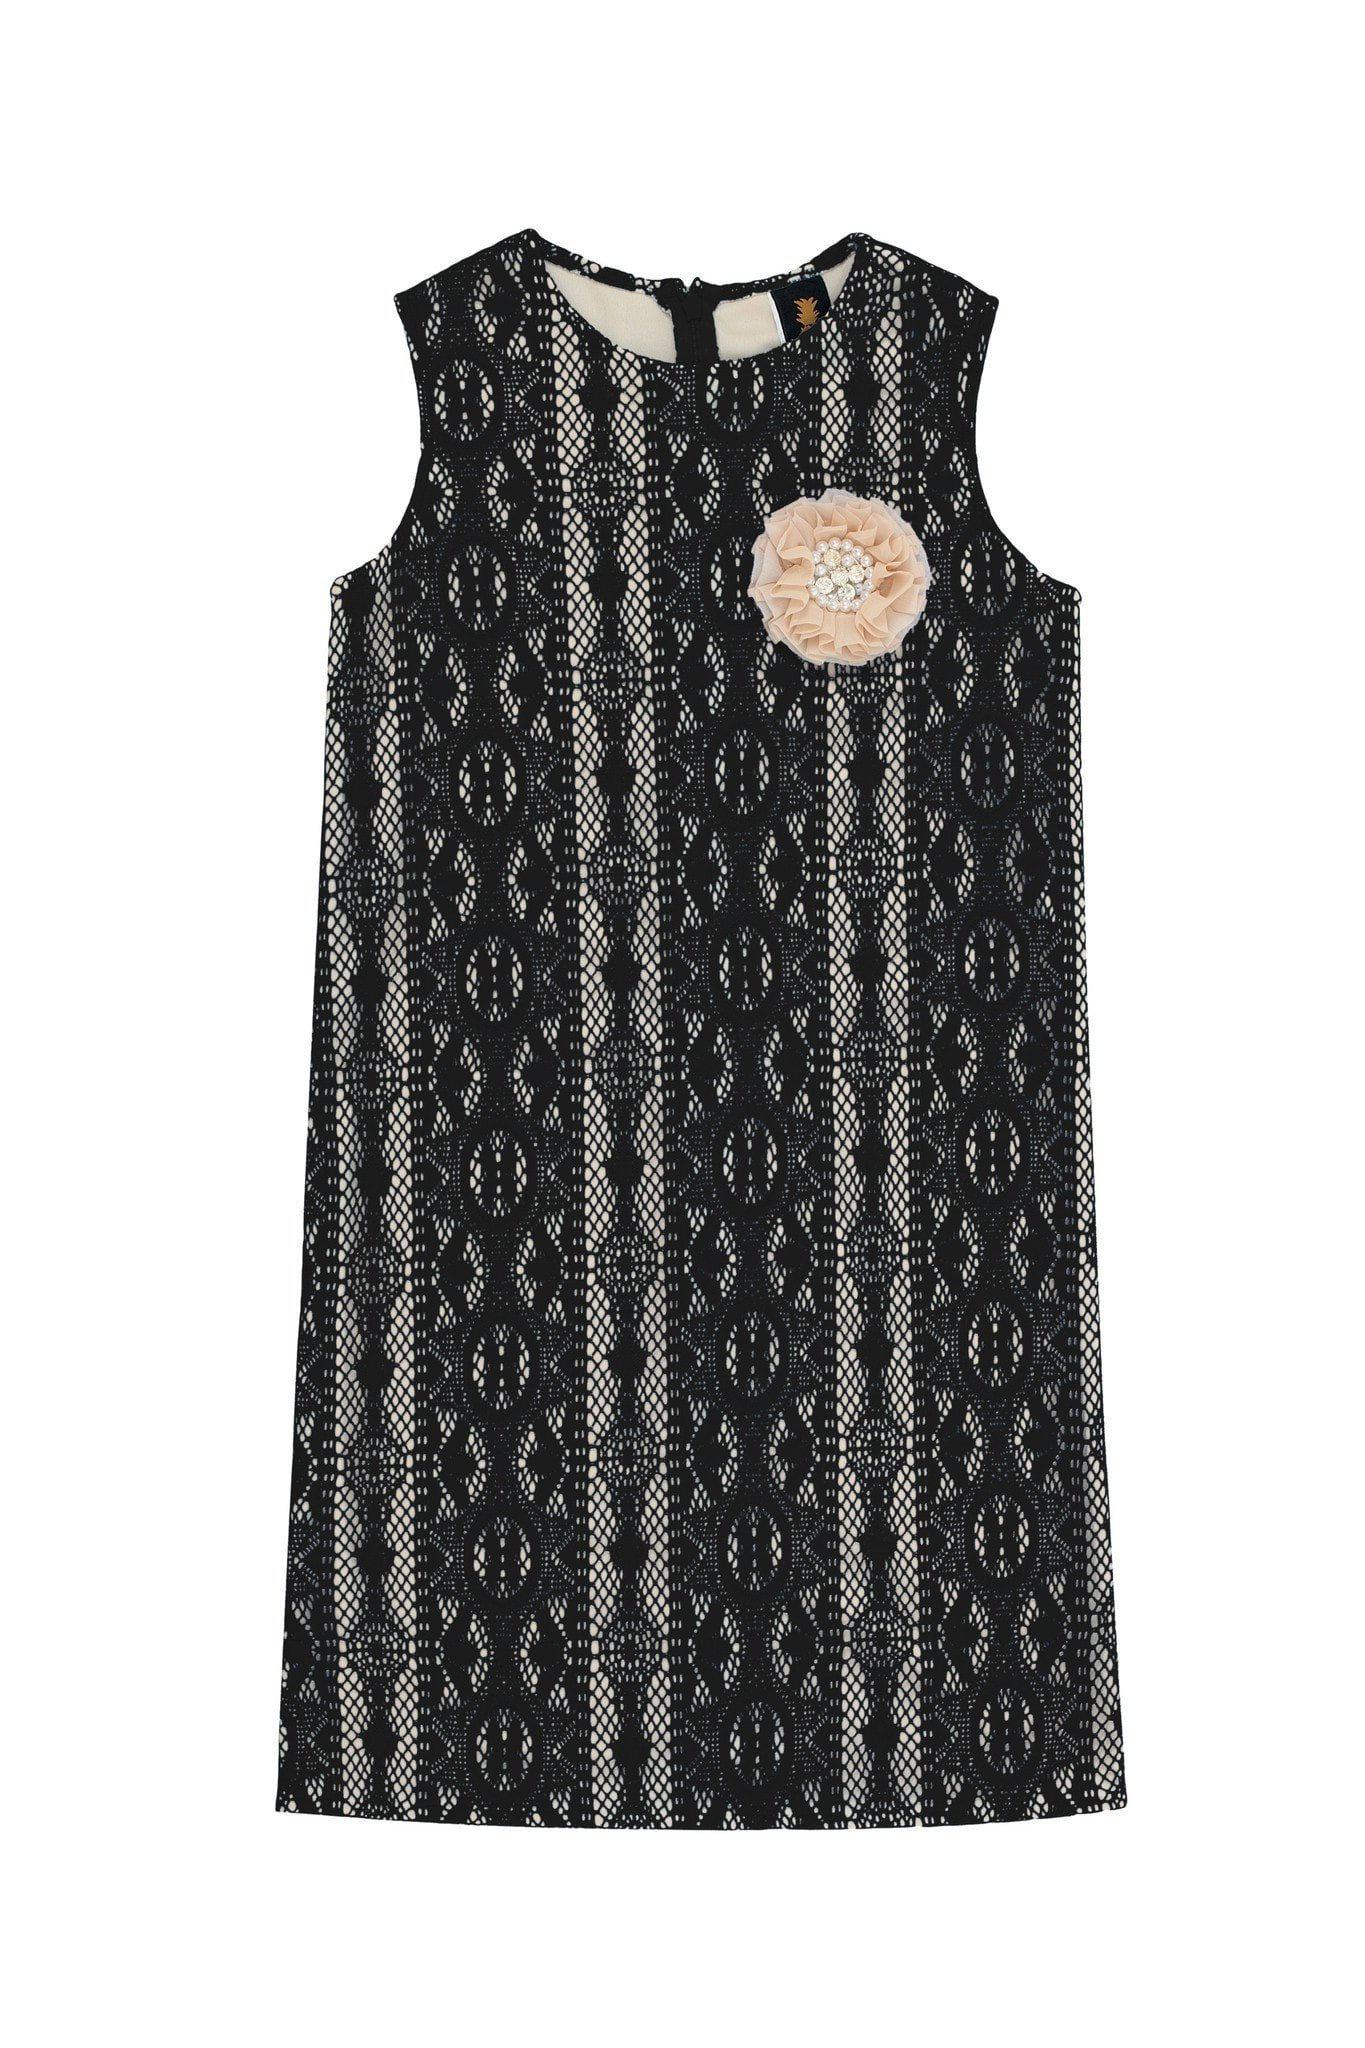 Black Crochet Lace Sleeveless Shift Fancy Cocktail Party Dress - Girls - Pineapple Clothing